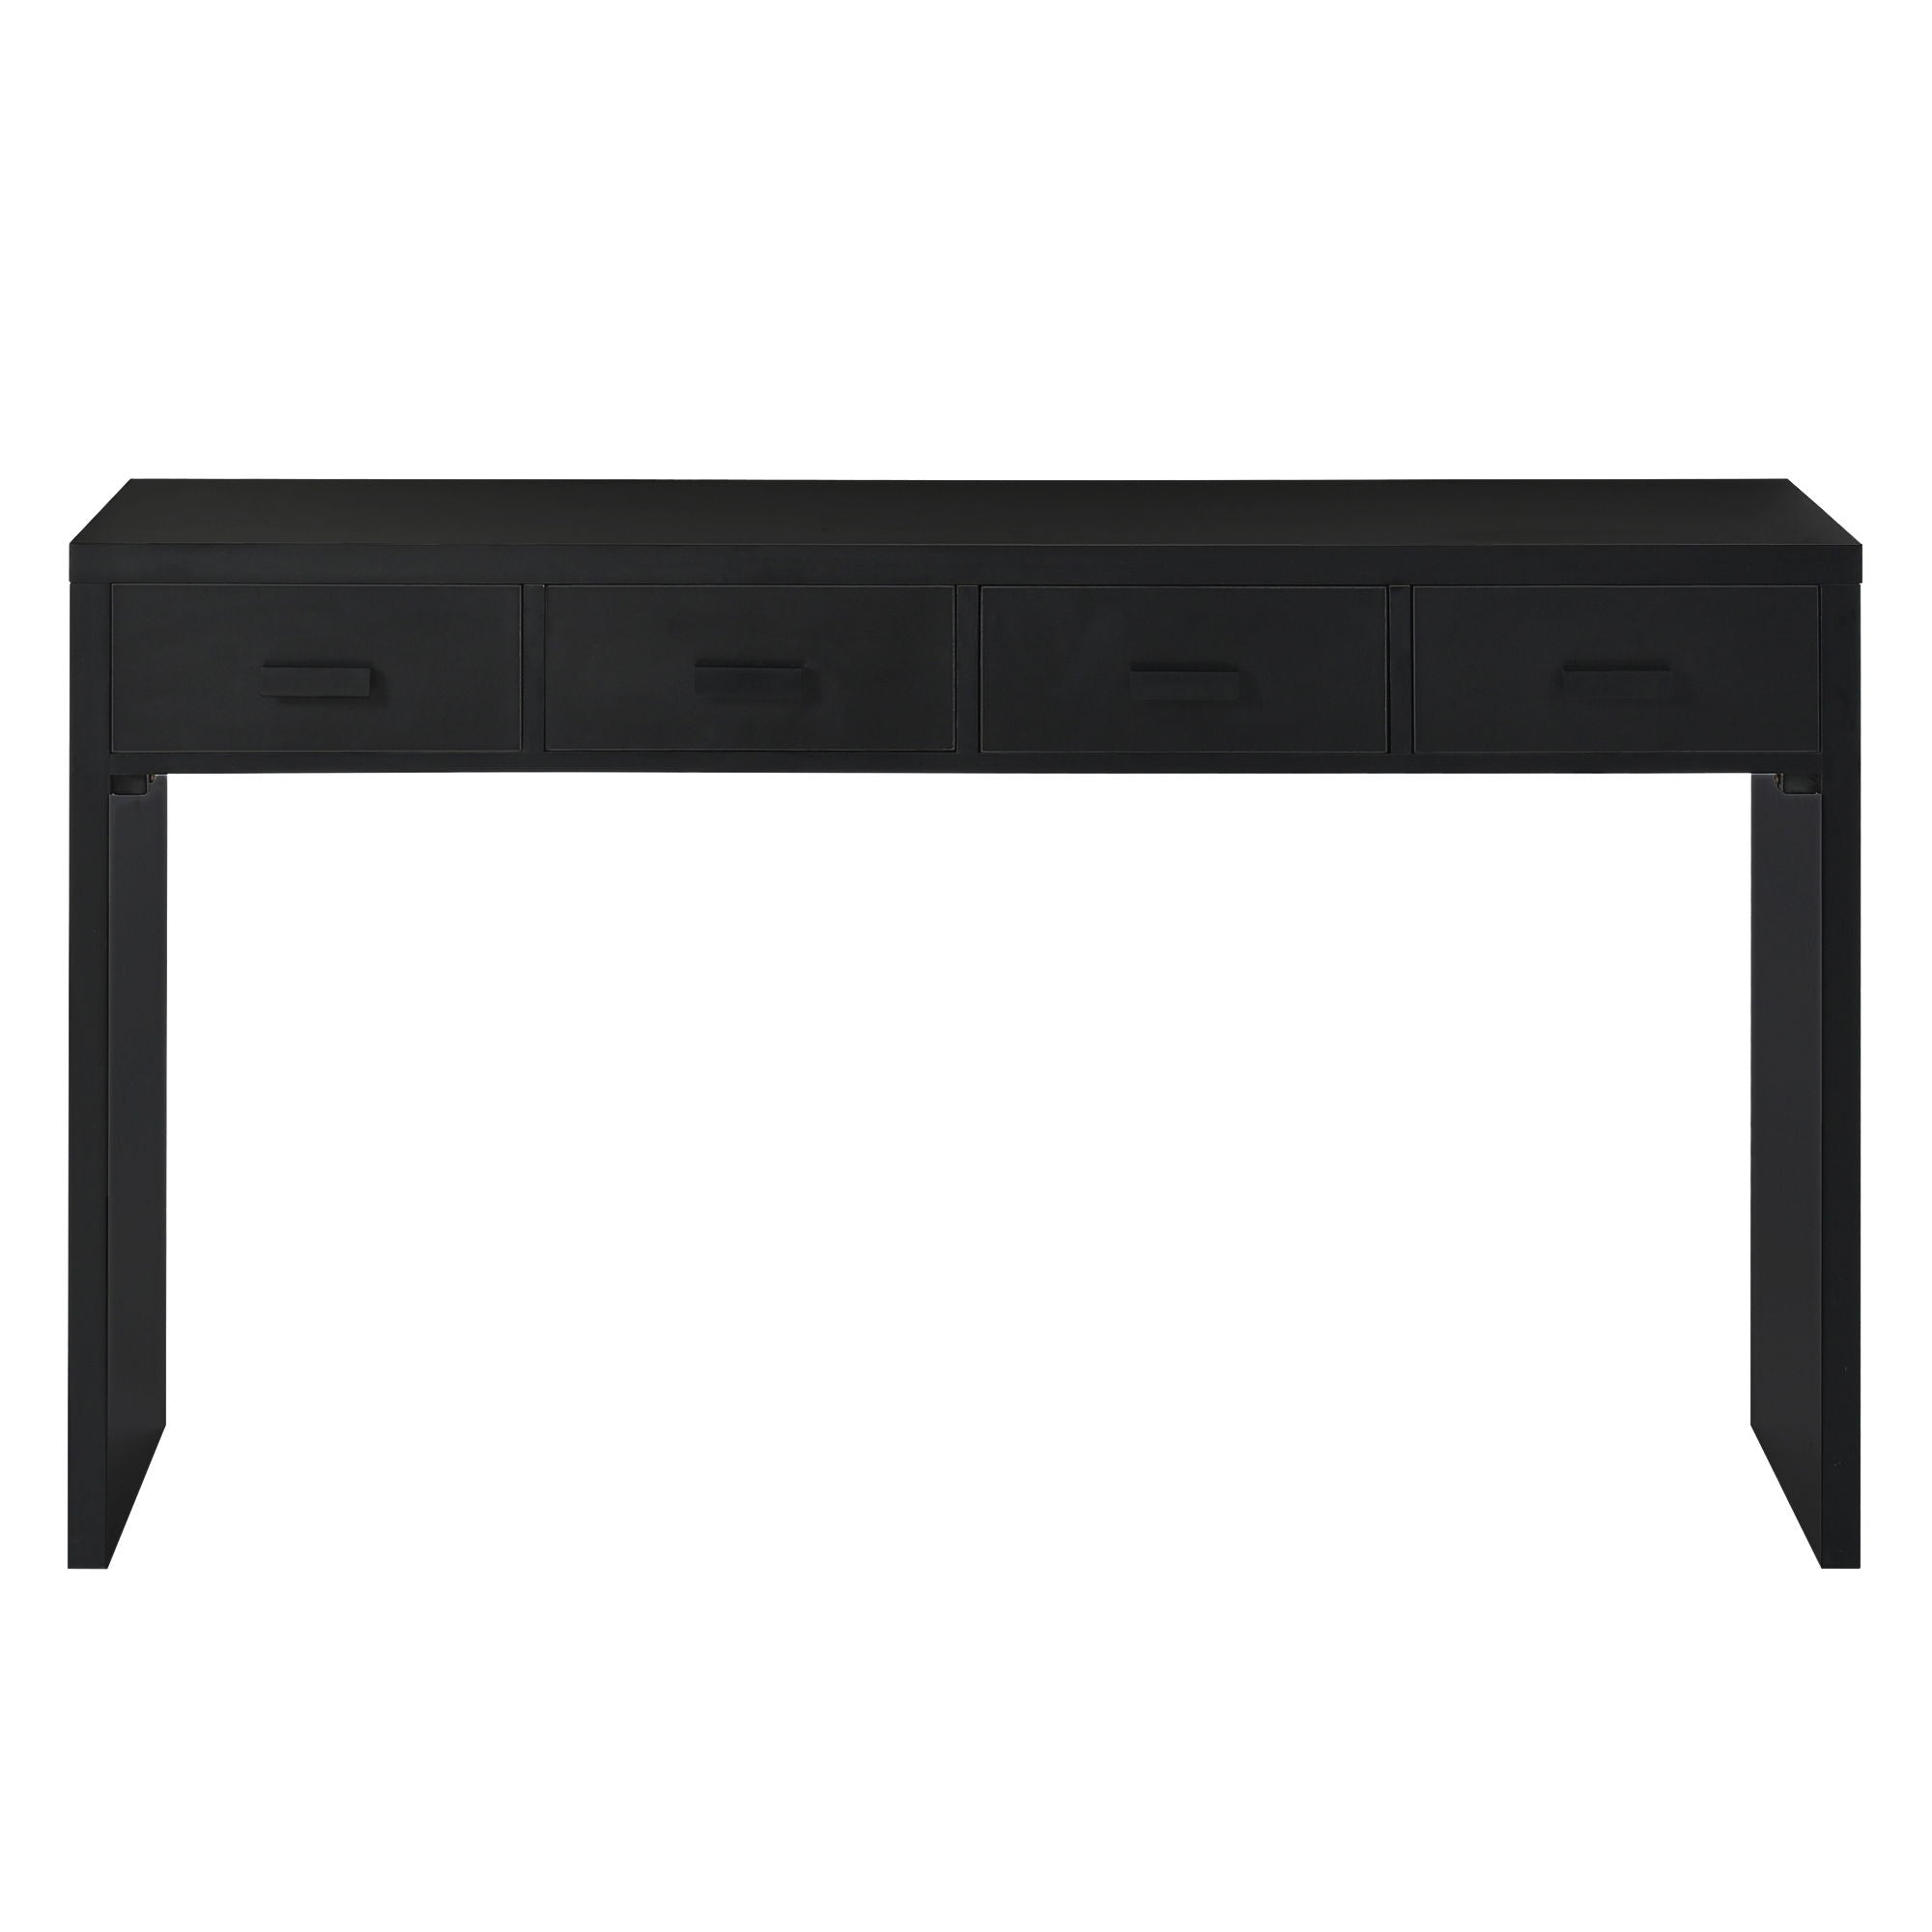 Trexm Modern Minimalist Console Table With Open Tabletop And Four Drawers With Metal Handles For Entry Way, Living Room And Dining Room (Black)